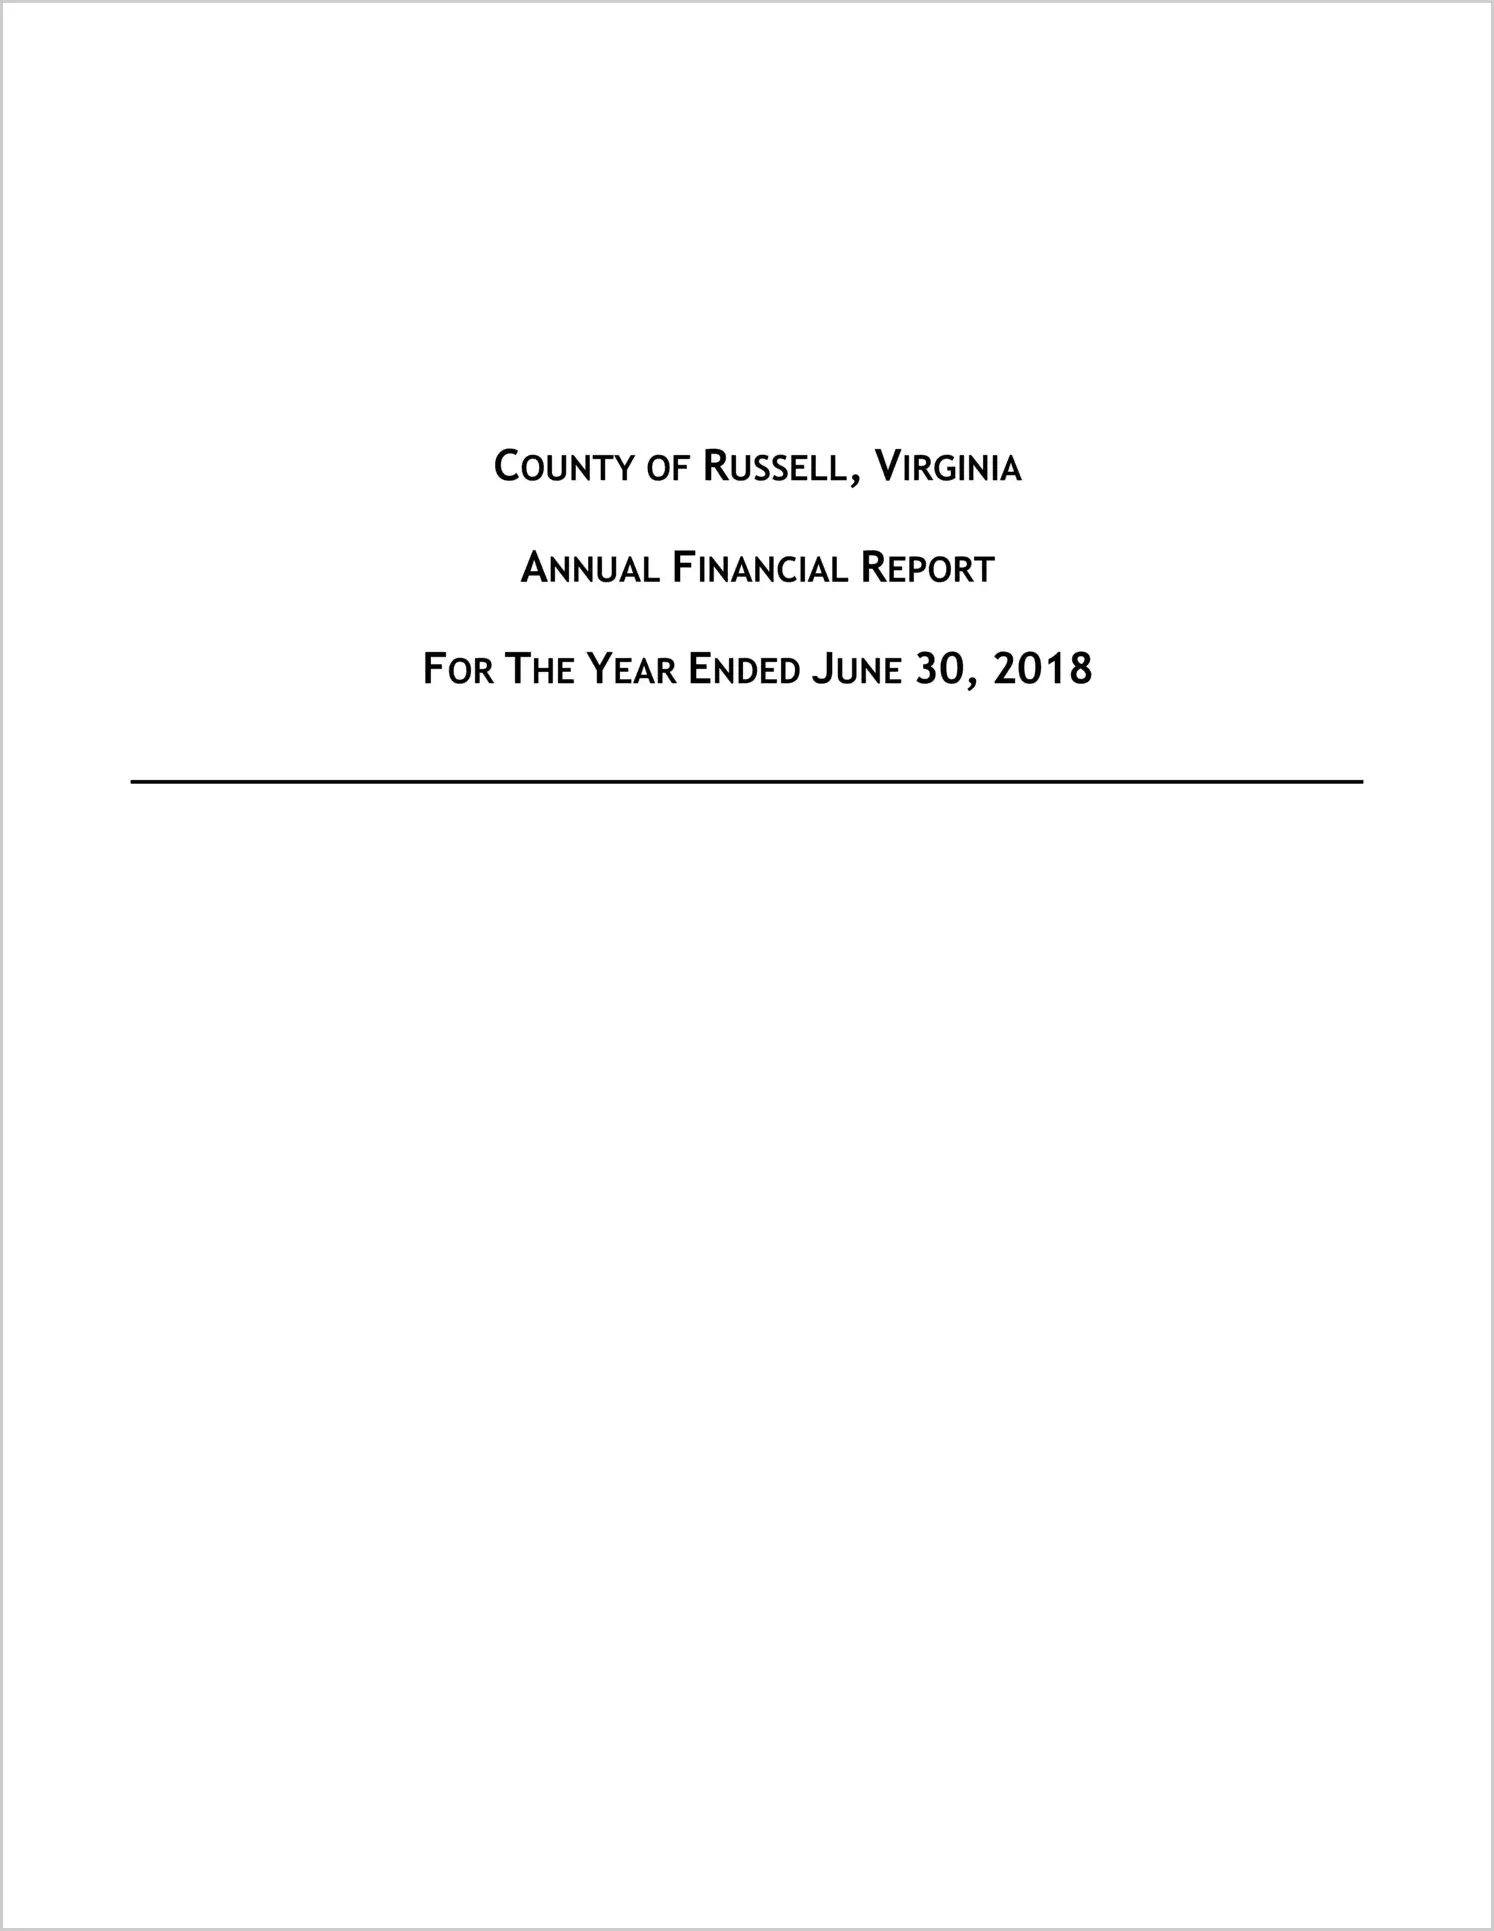 2018 Annual Financial Report for County of Russell